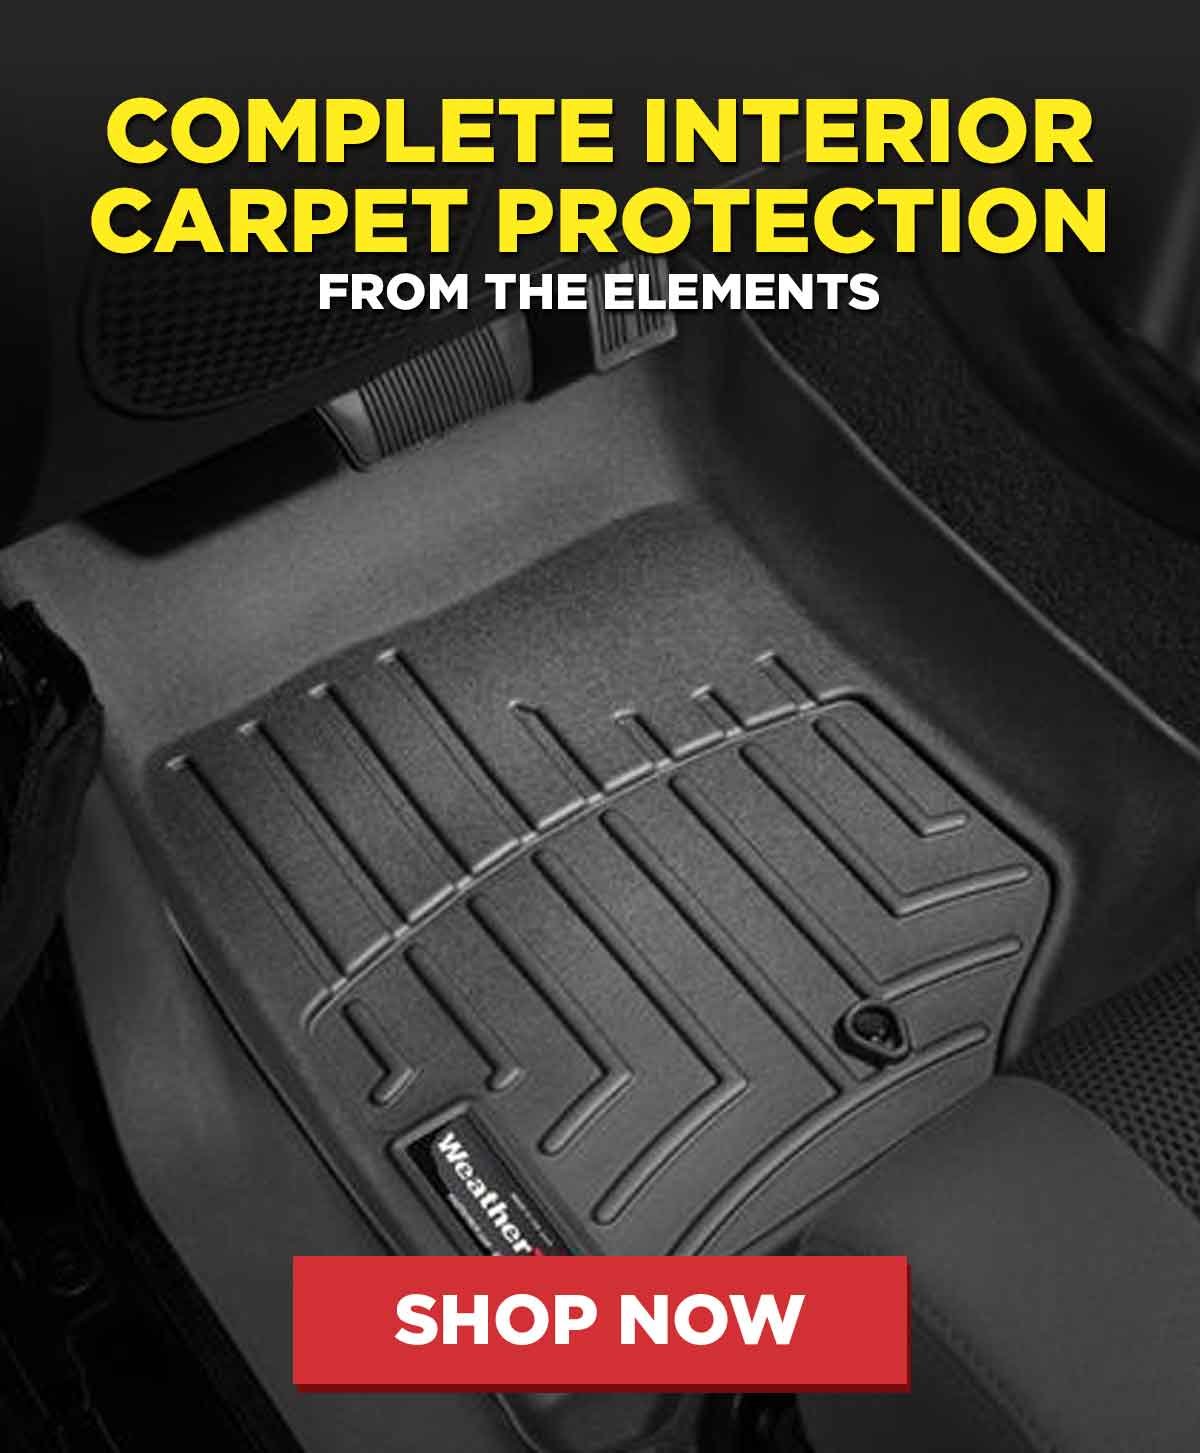 Complete Interior Carpet Protection From The Elements